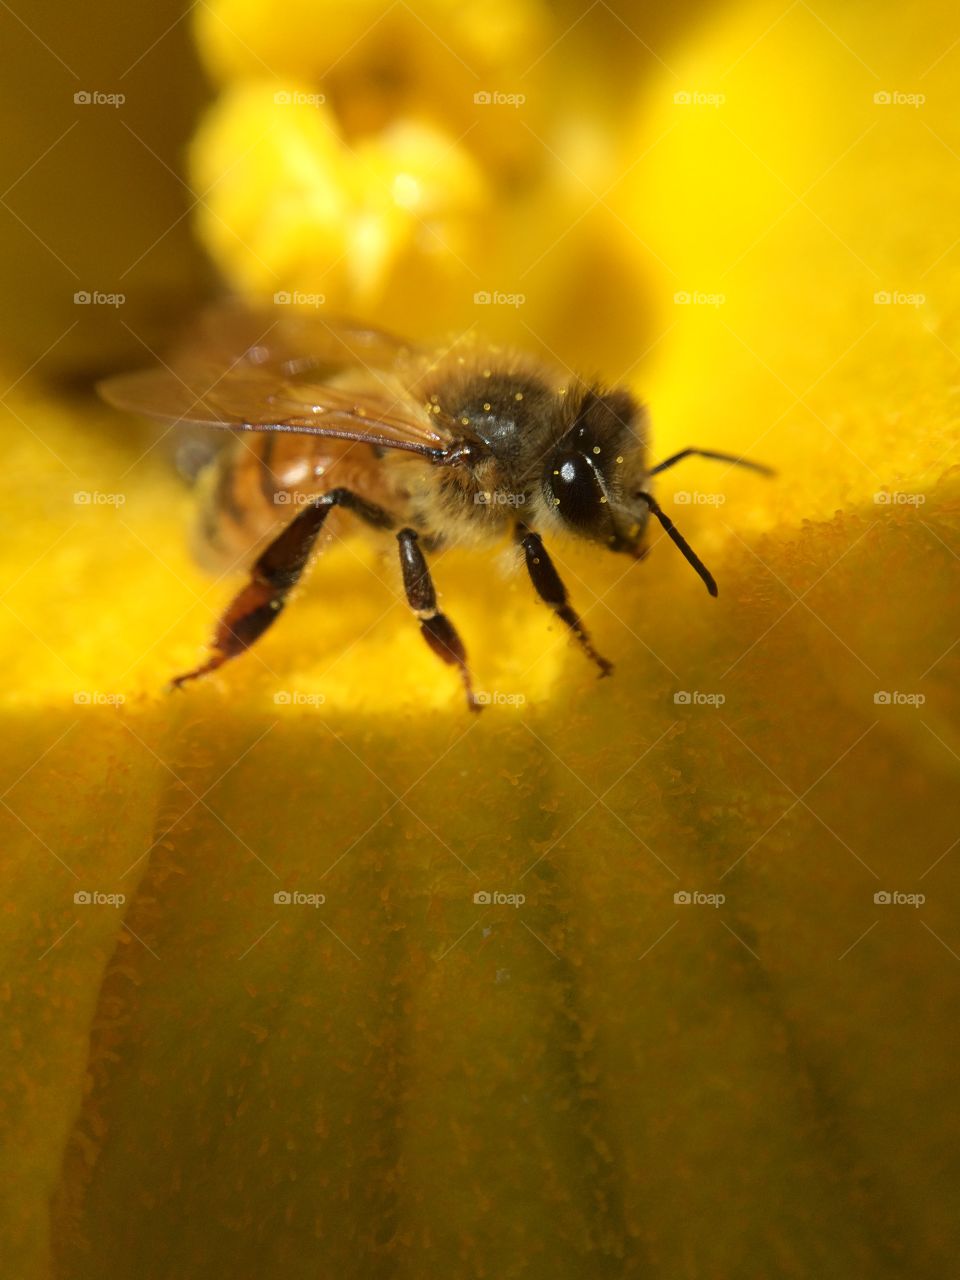 Bee and pollen